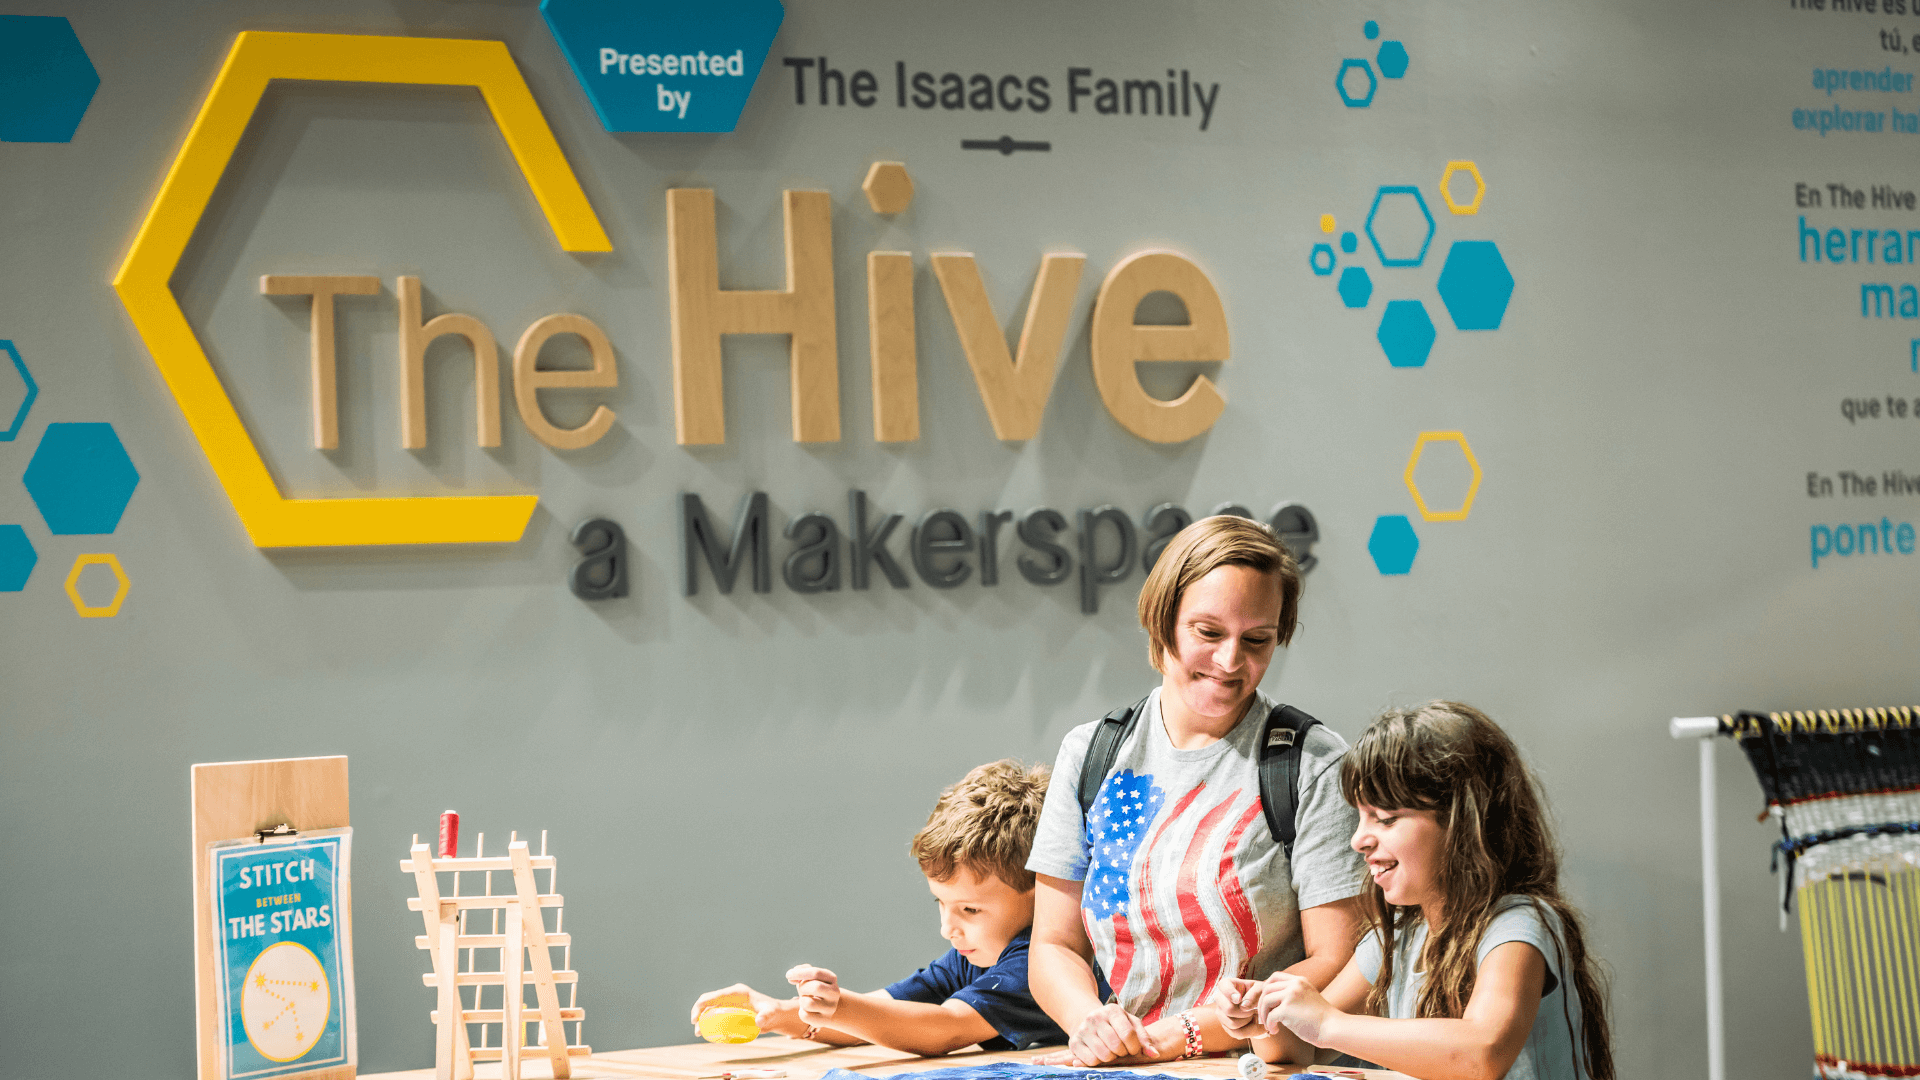 Guests enjoying The Hive: A Makerspace